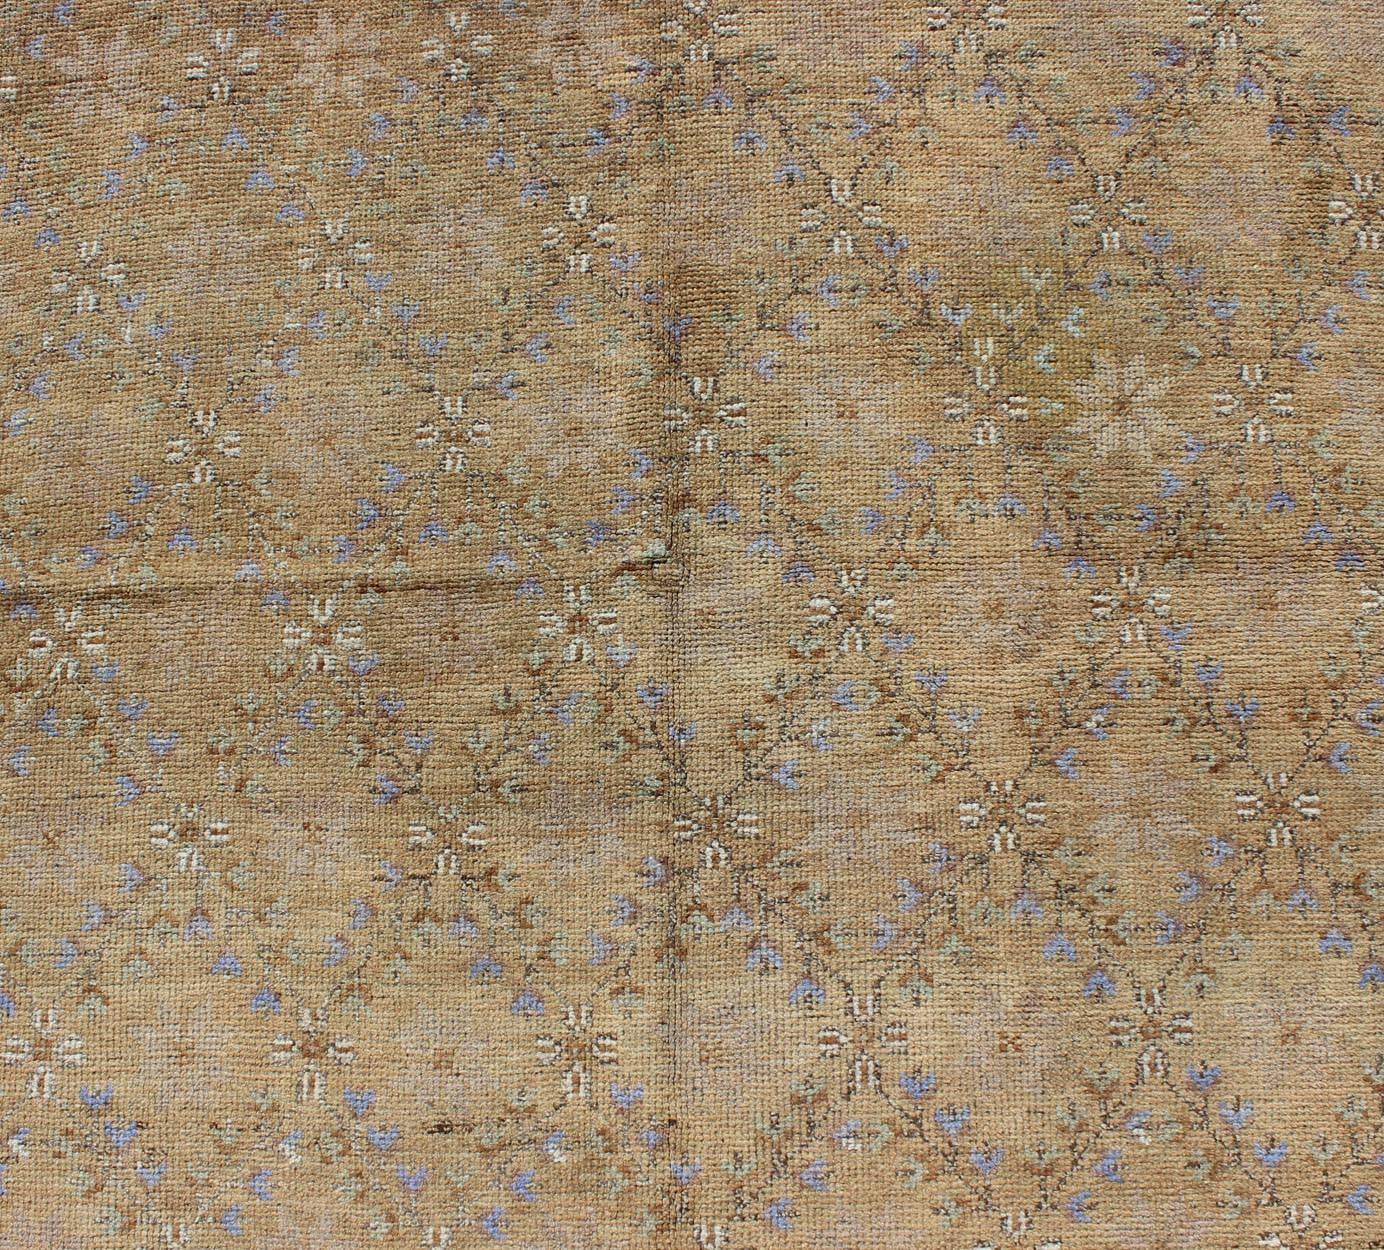 Wool Turkish Oushak Rug with All-Over Design and Neutral Colors; Tan, Taupe, Icy Blue For Sale